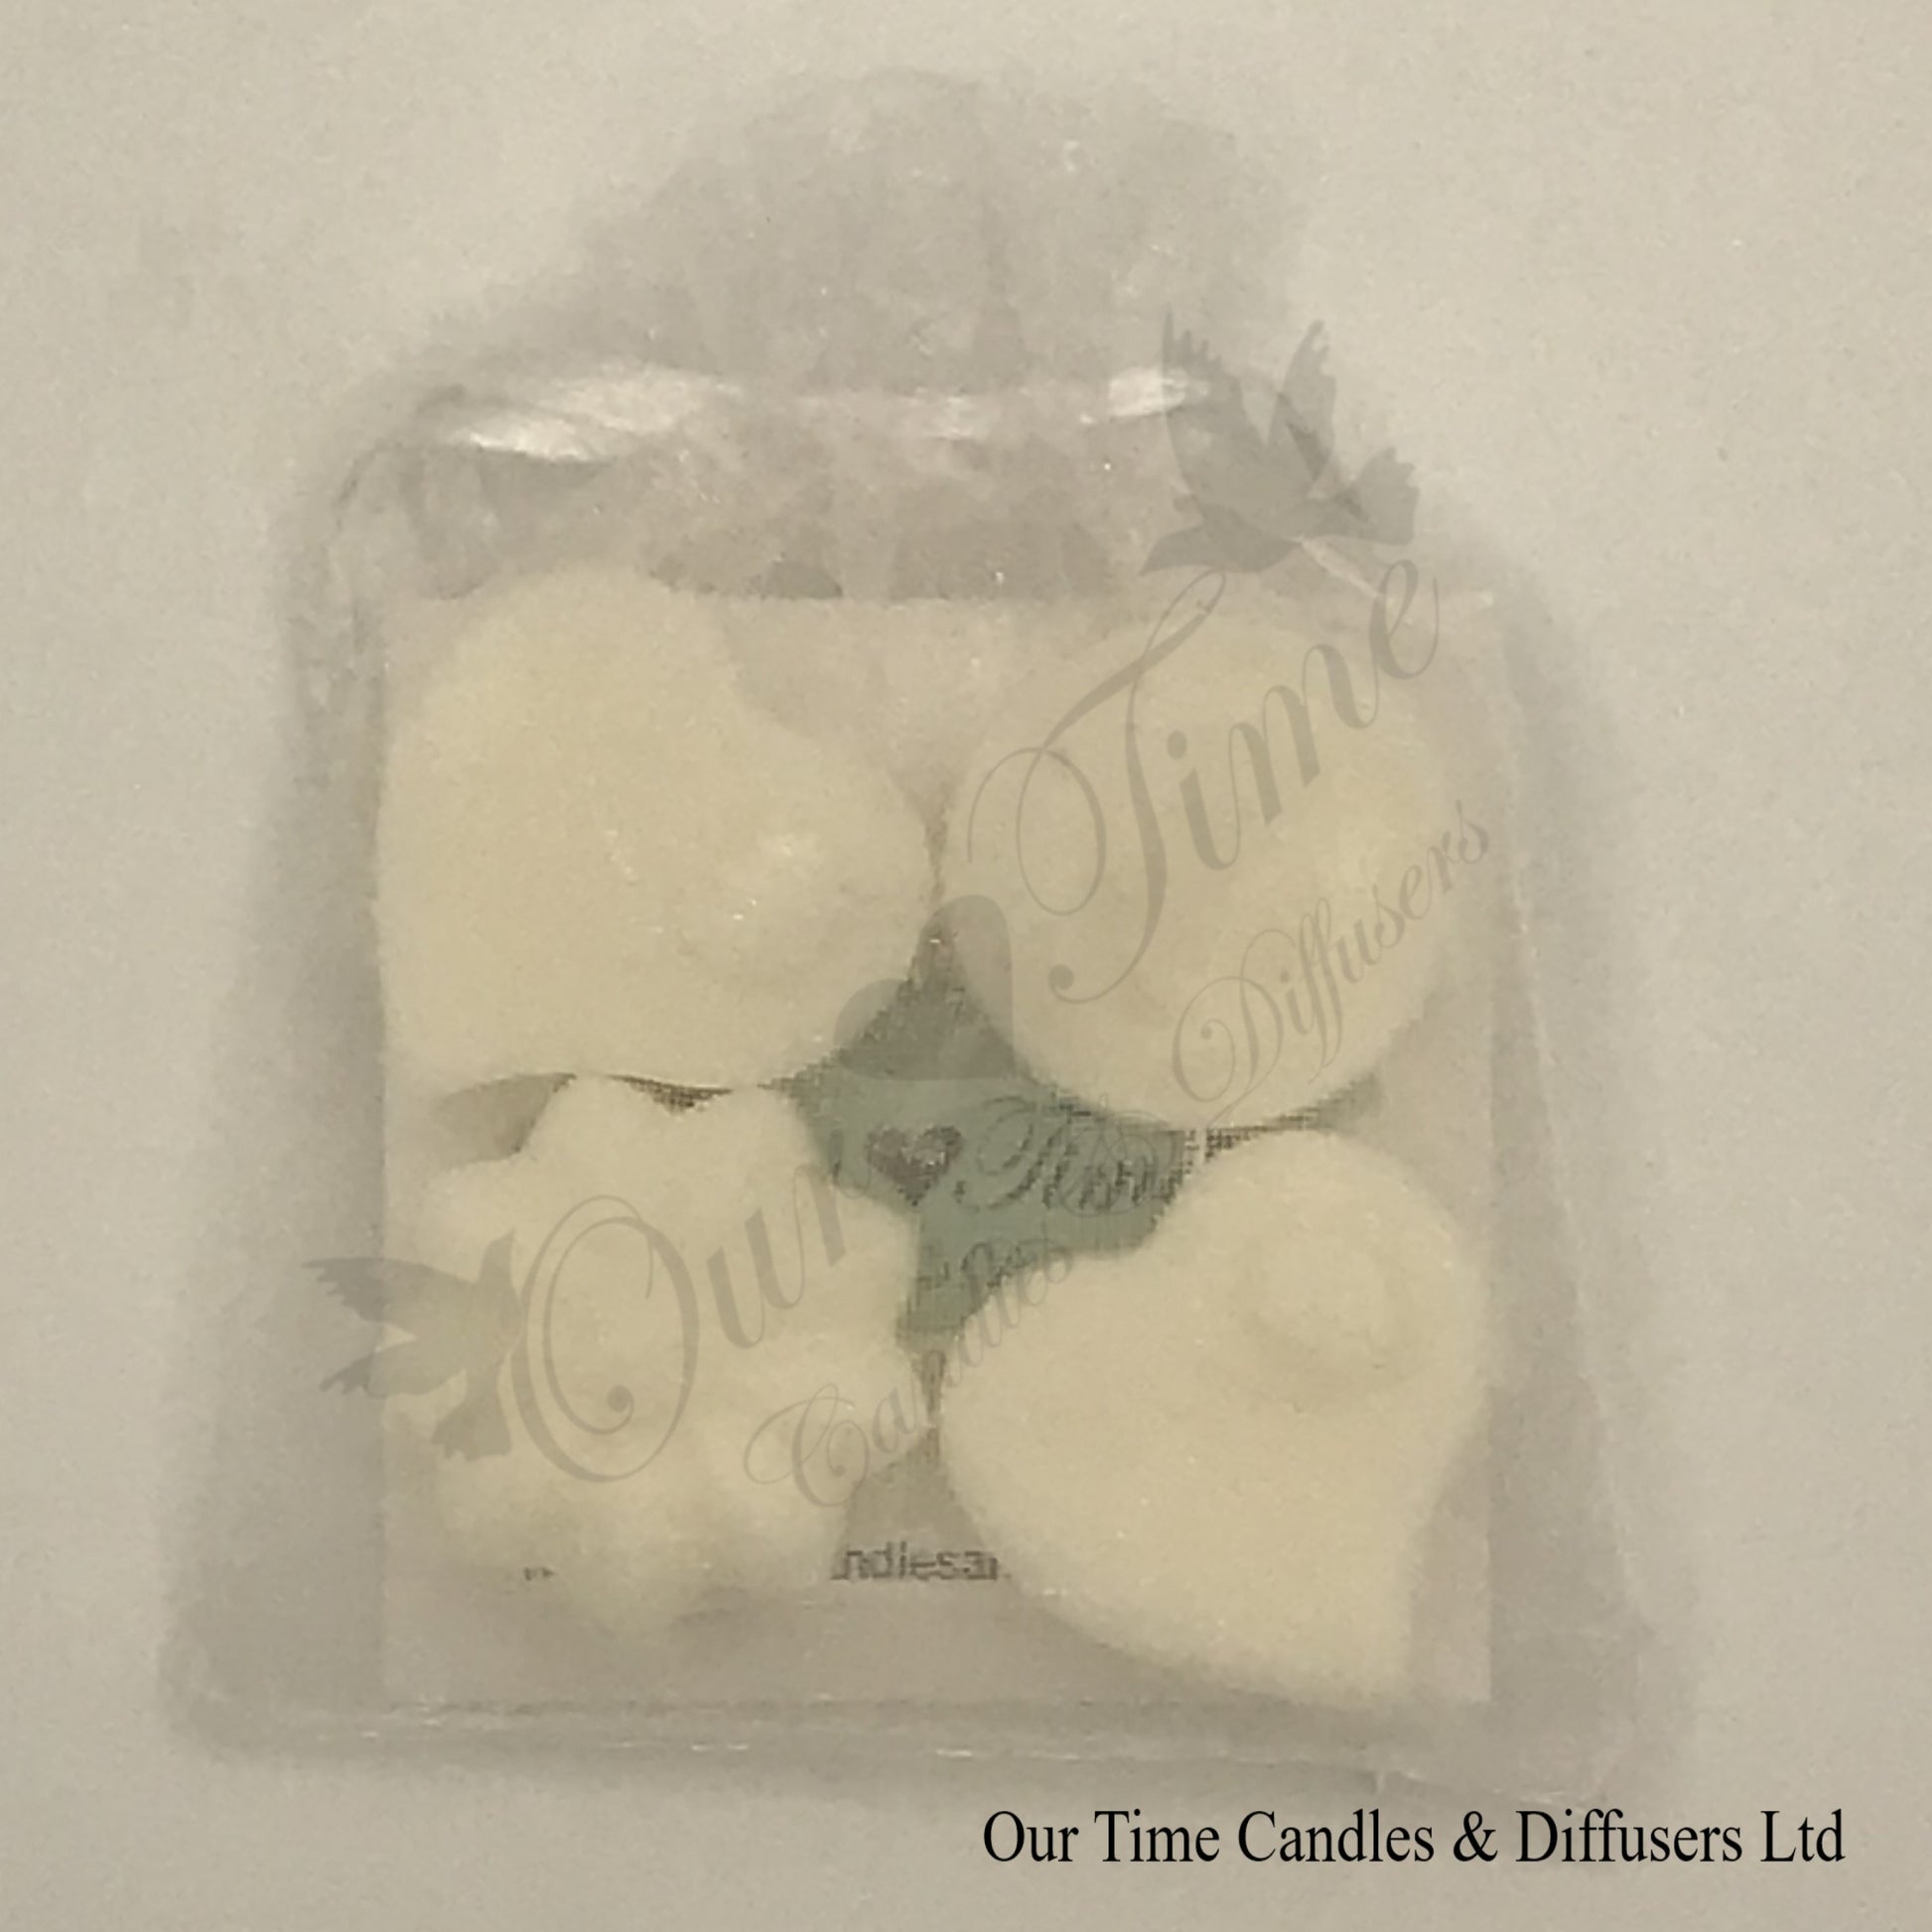 Wedding Favour Melt Shapes in organza bag from Our Time Candles and Diffusers